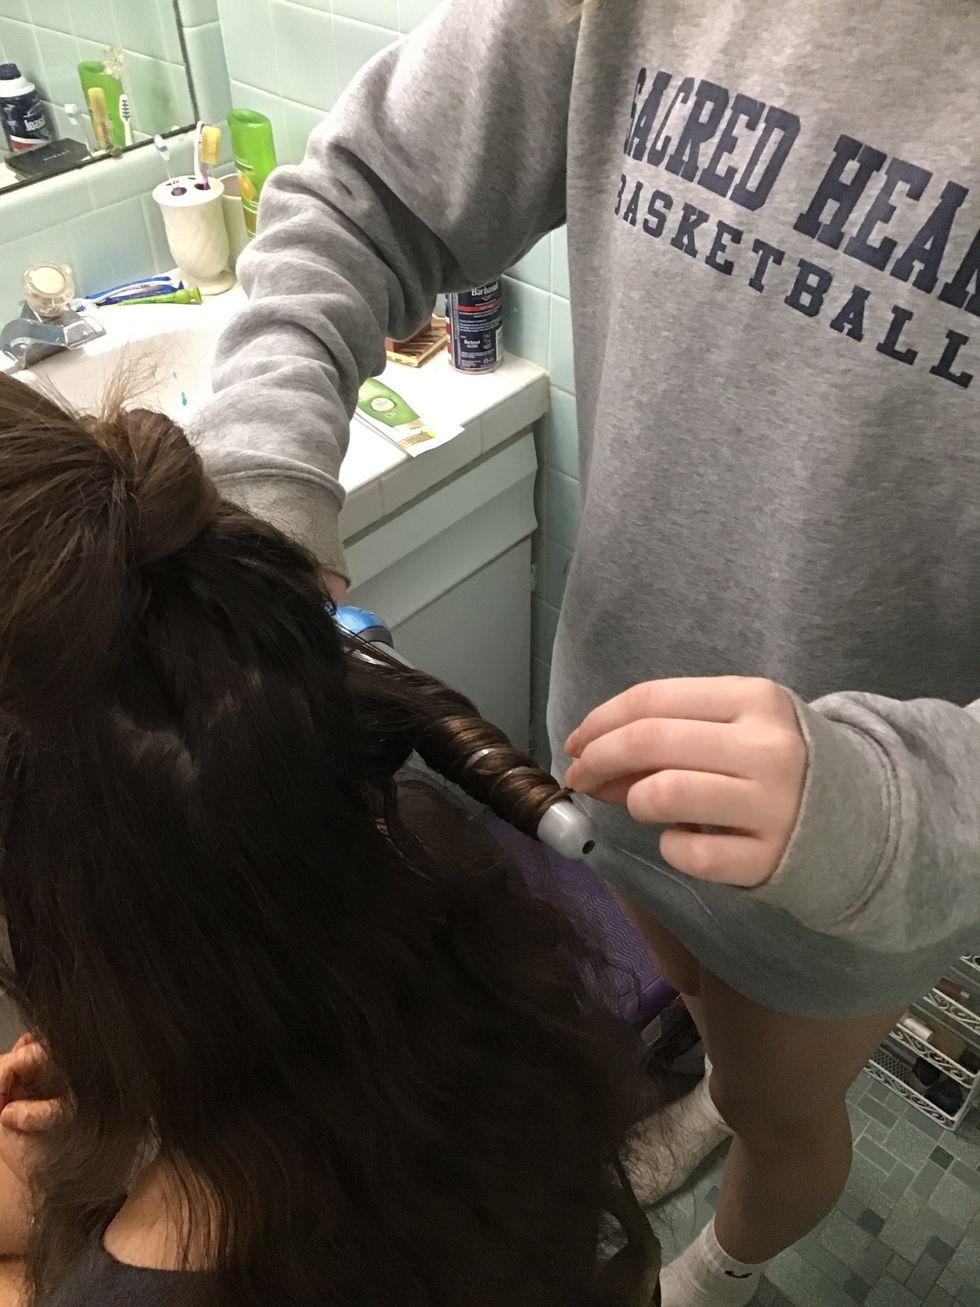 Wrap hair around wand, and do this to all the hair